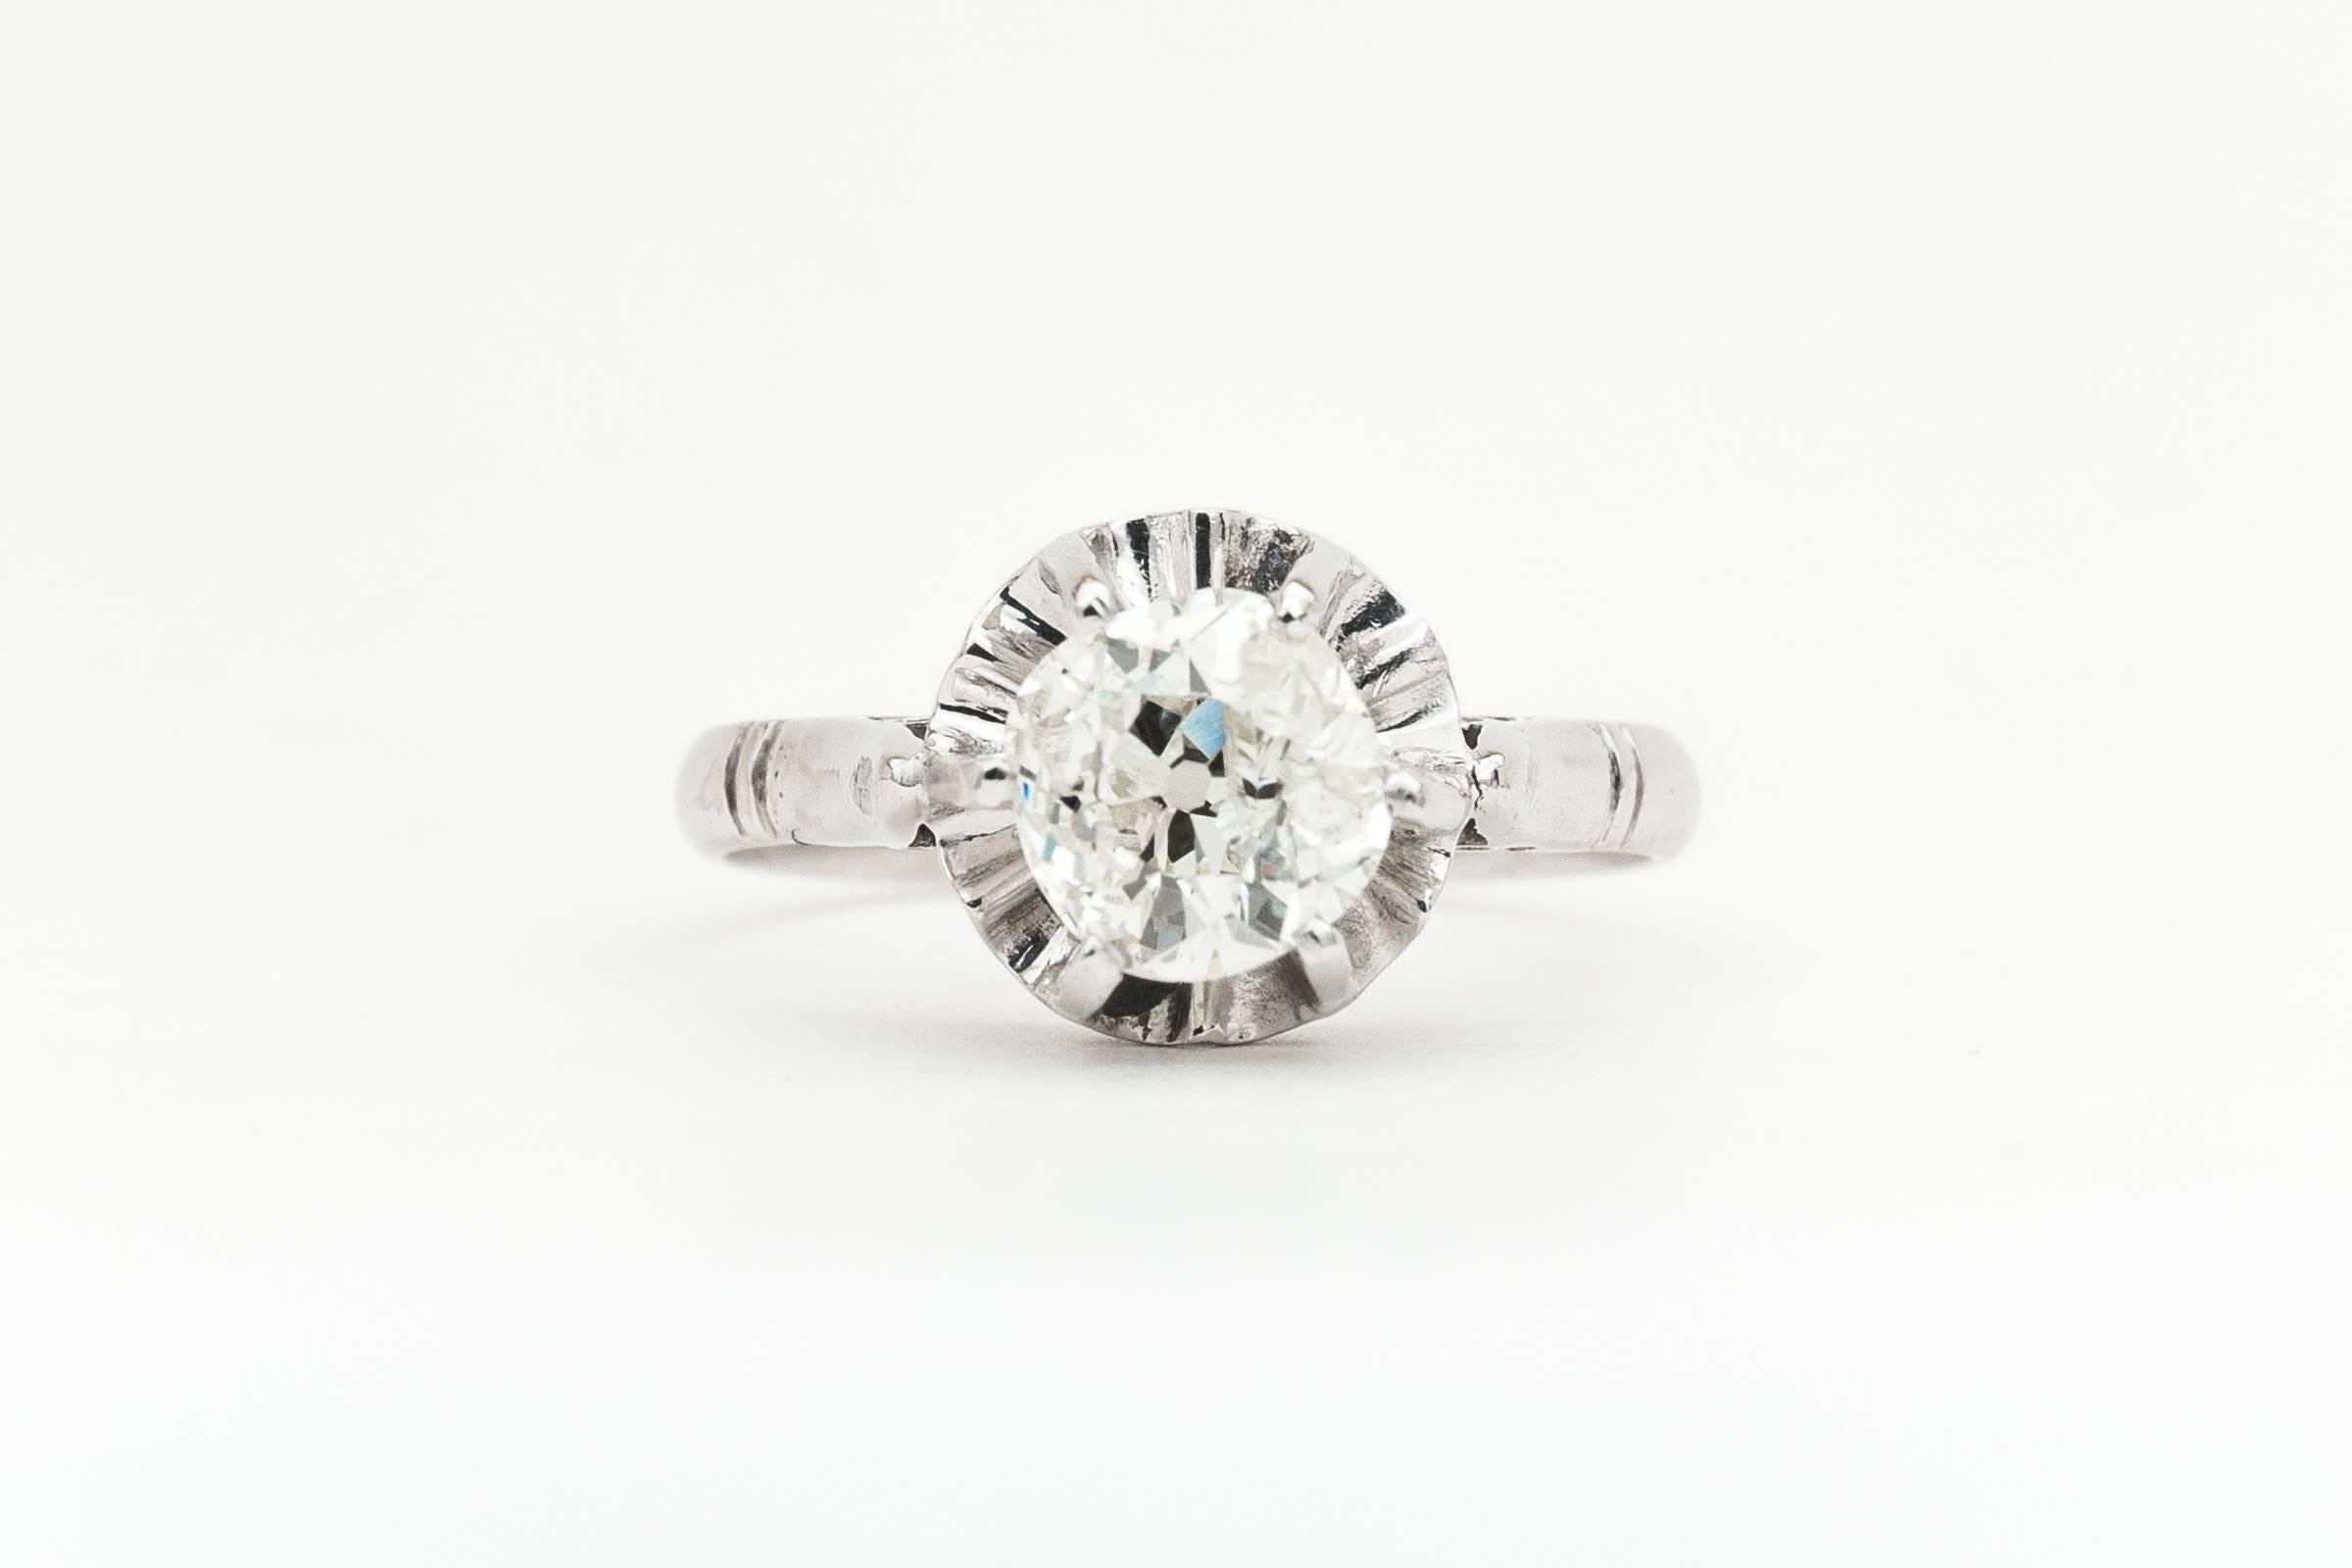 Beacon HIll Jewelers Presents:

An art deco period platinum and diamond ring from France. Of a quintessentially French style, this ring features a sparkling antique mine cut diamond weighing 0.91 carats in a hand crafted platinum mounting.

Grading